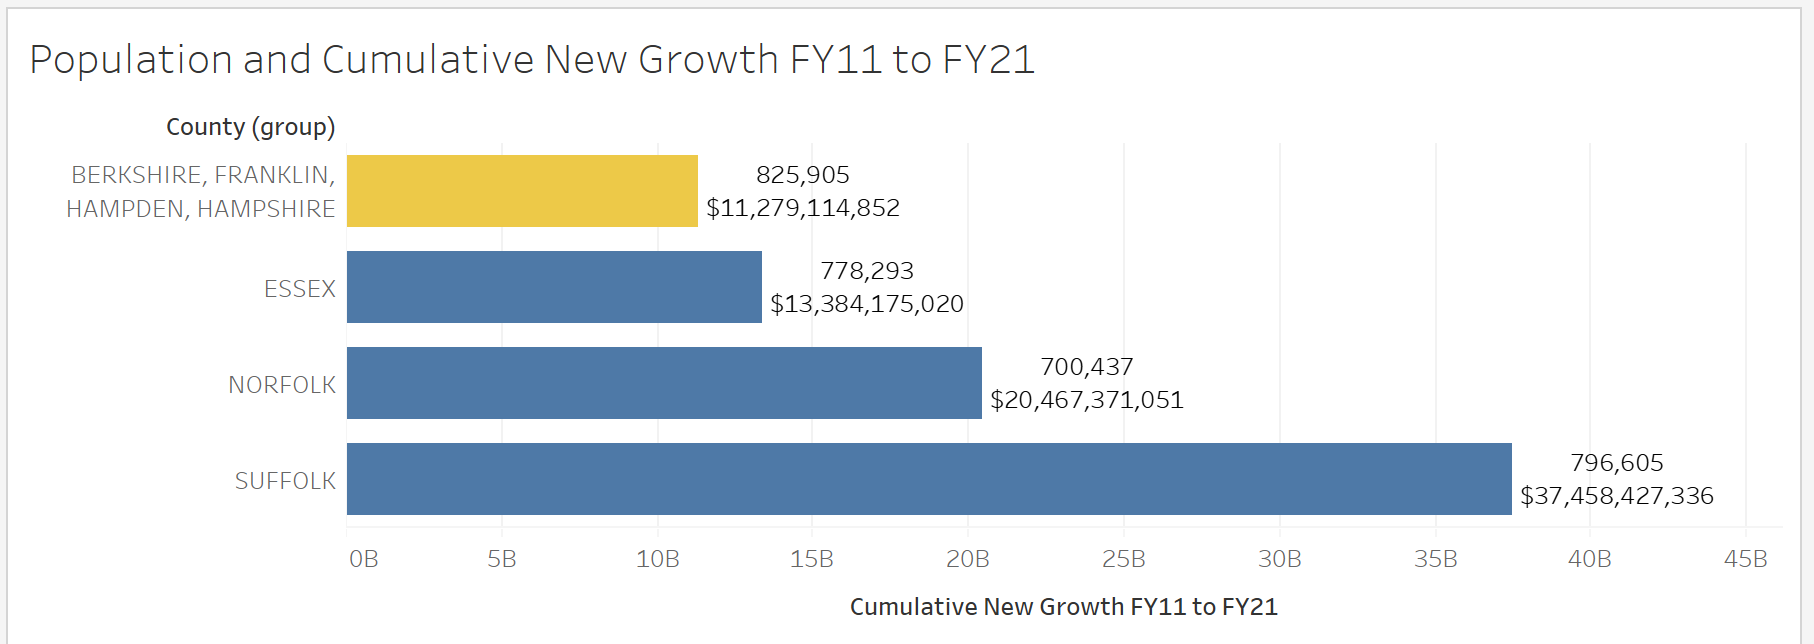 Figure 8—Population and Cumulative New Growth FY 2011 to FY 2021